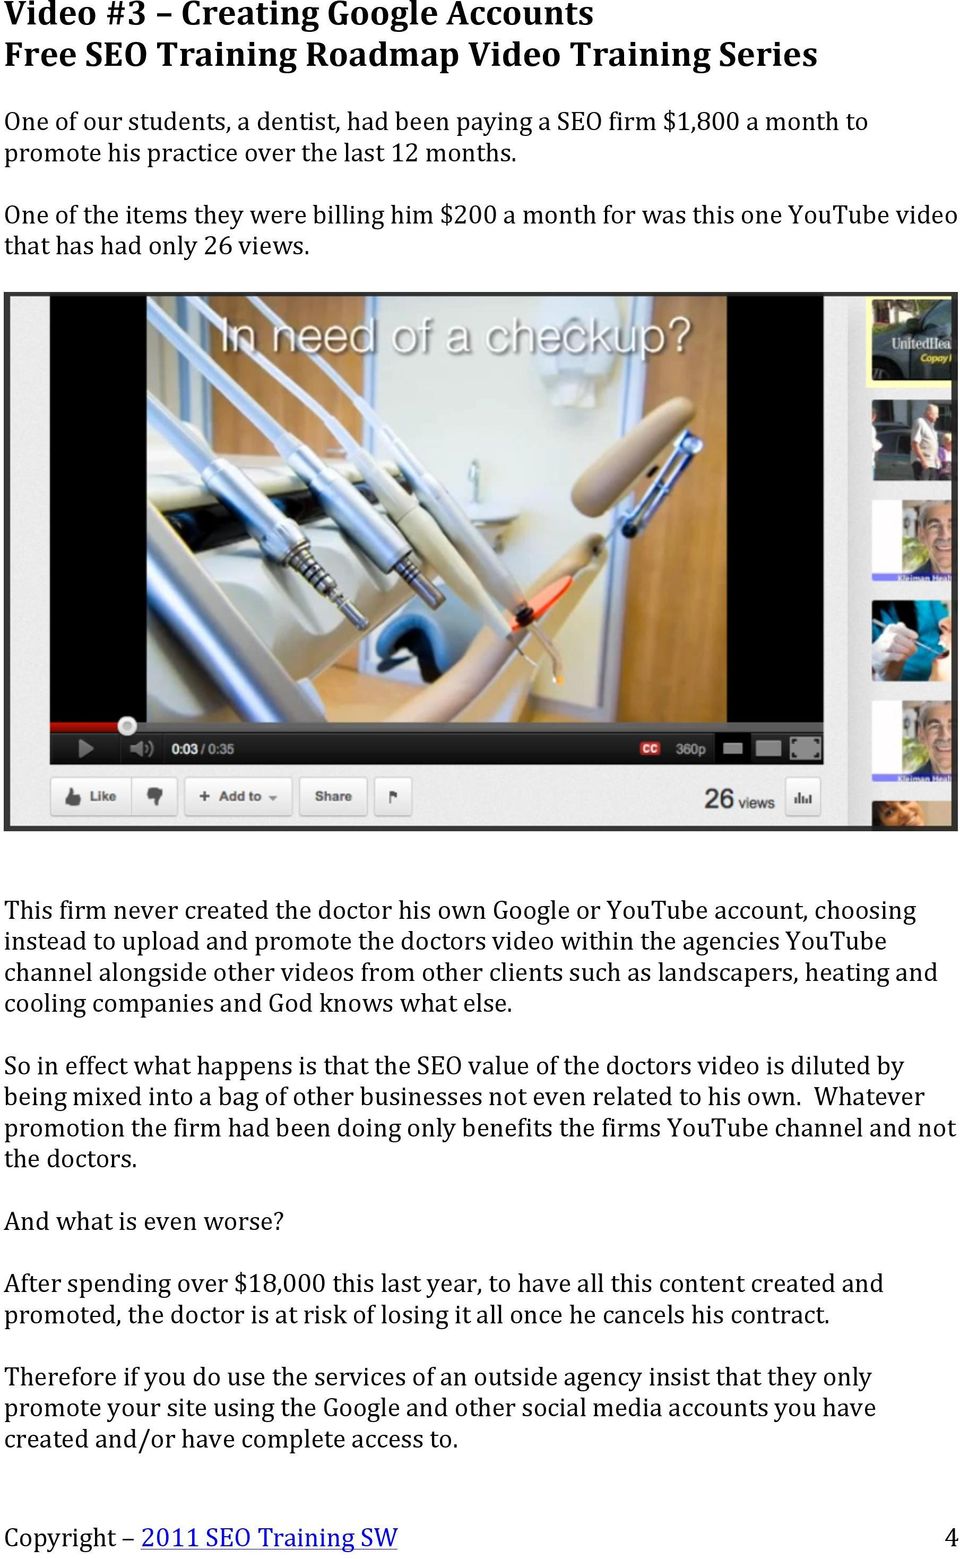 This firm never created the doctor his own Google or YouTube account, choosing instead to upload and promote the doctors video within the agencies YouTube channel alongside other videos from other